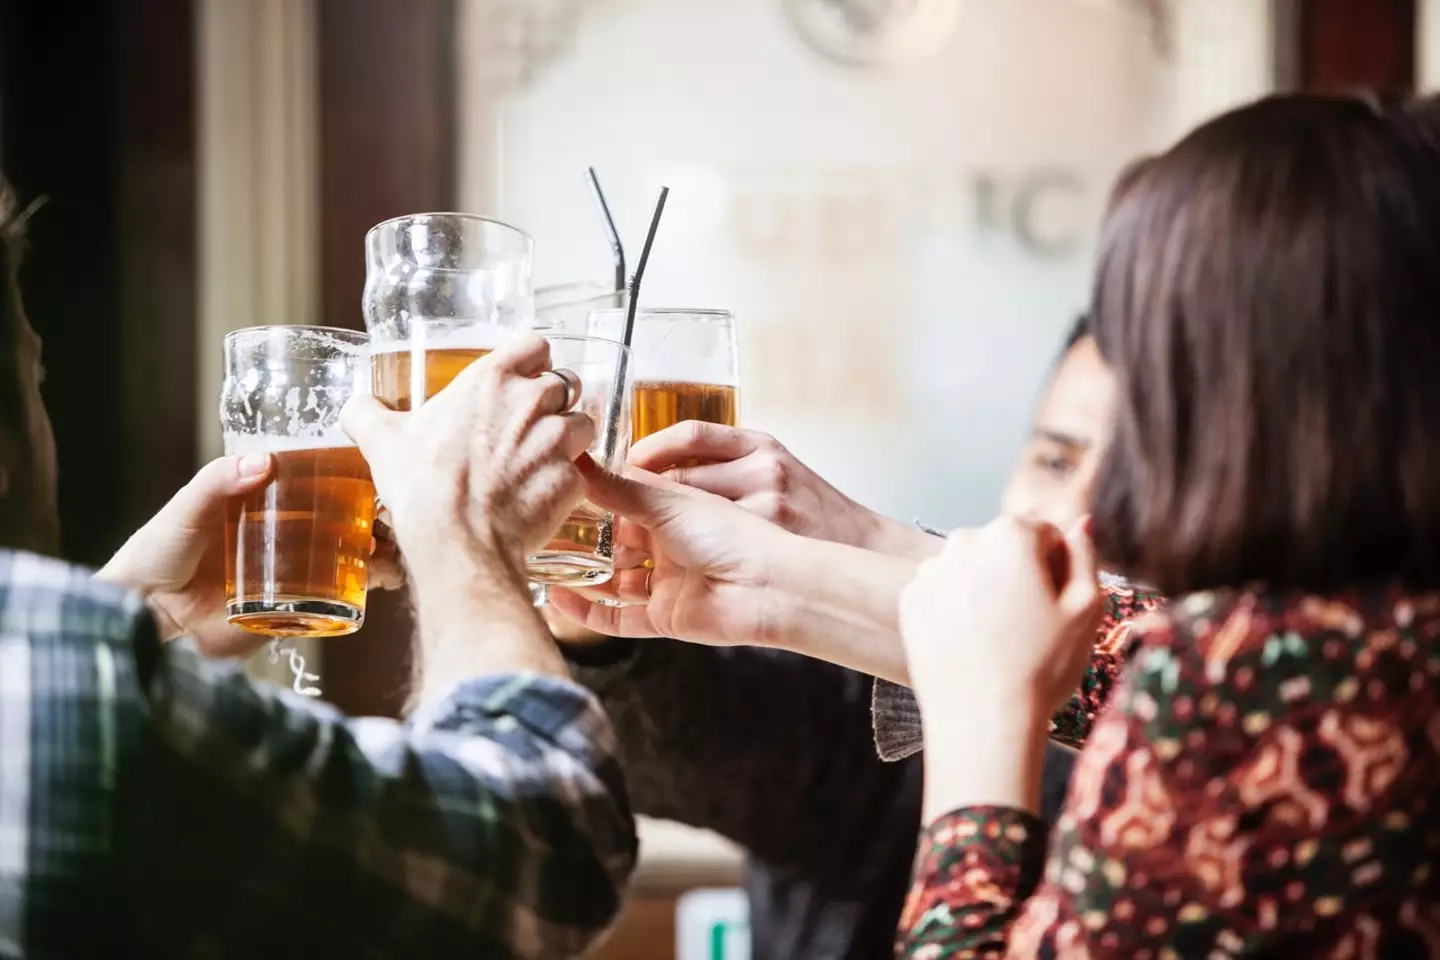 Binge drinking is 'probably worse for you' than you think, says the expert. (Getty Stock Images)